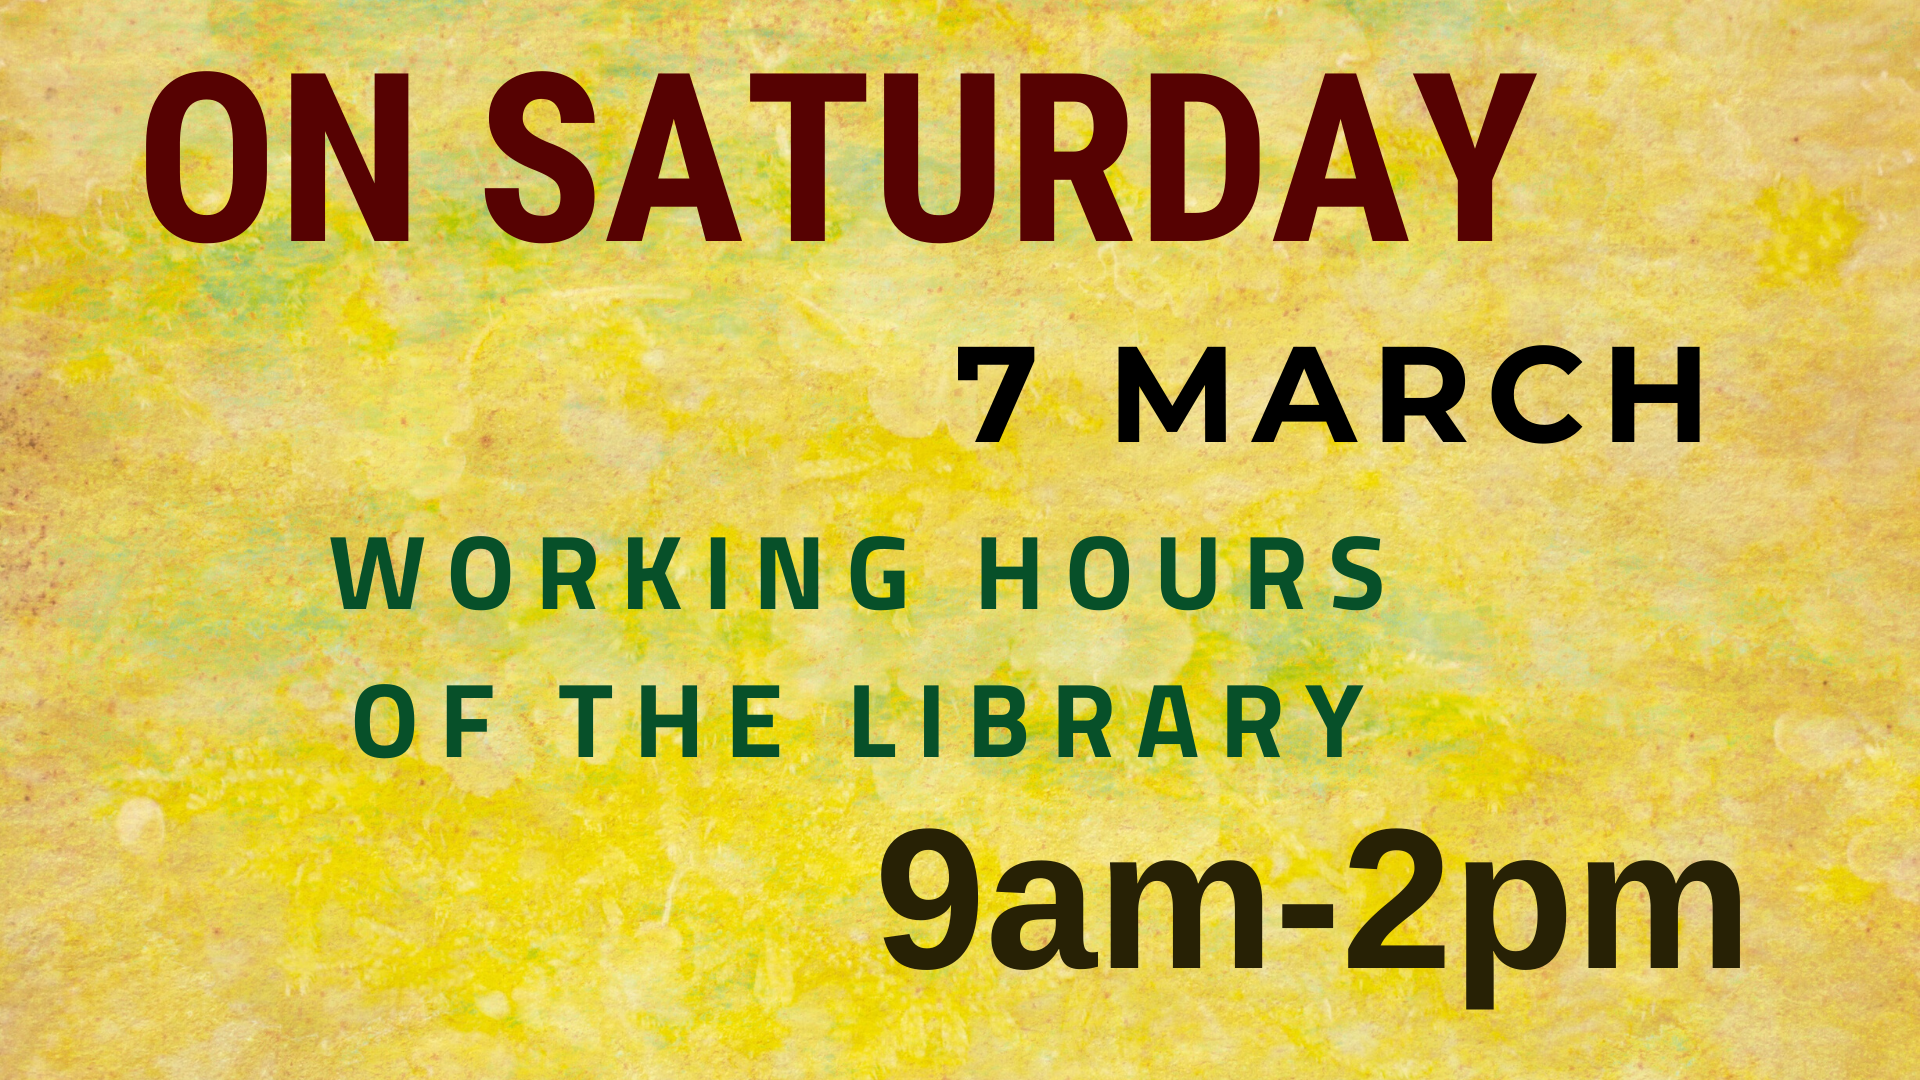 On Saturday 7 March our library is open from 9am until 2pm